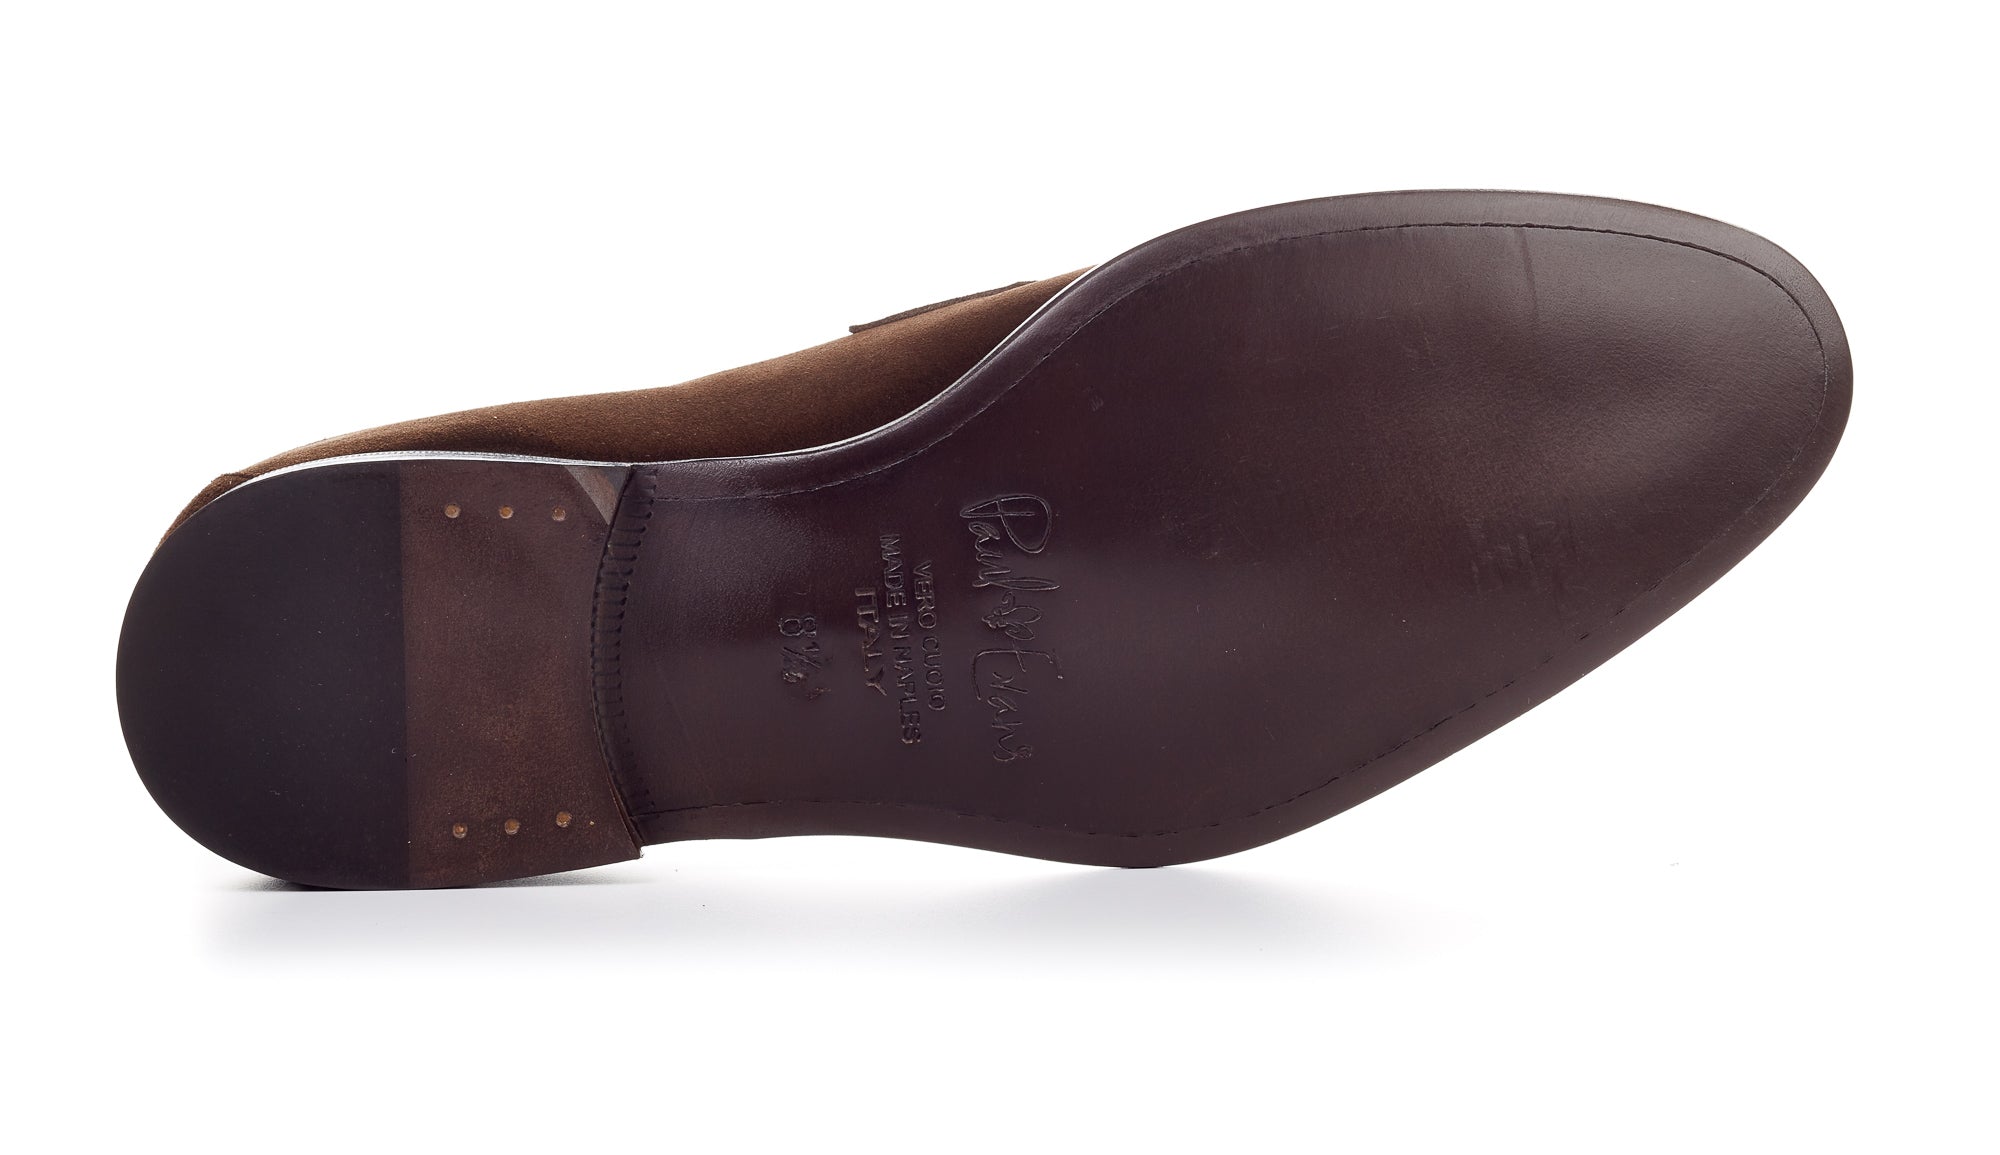 The Stewart Penny Loafer - Cafe Suede